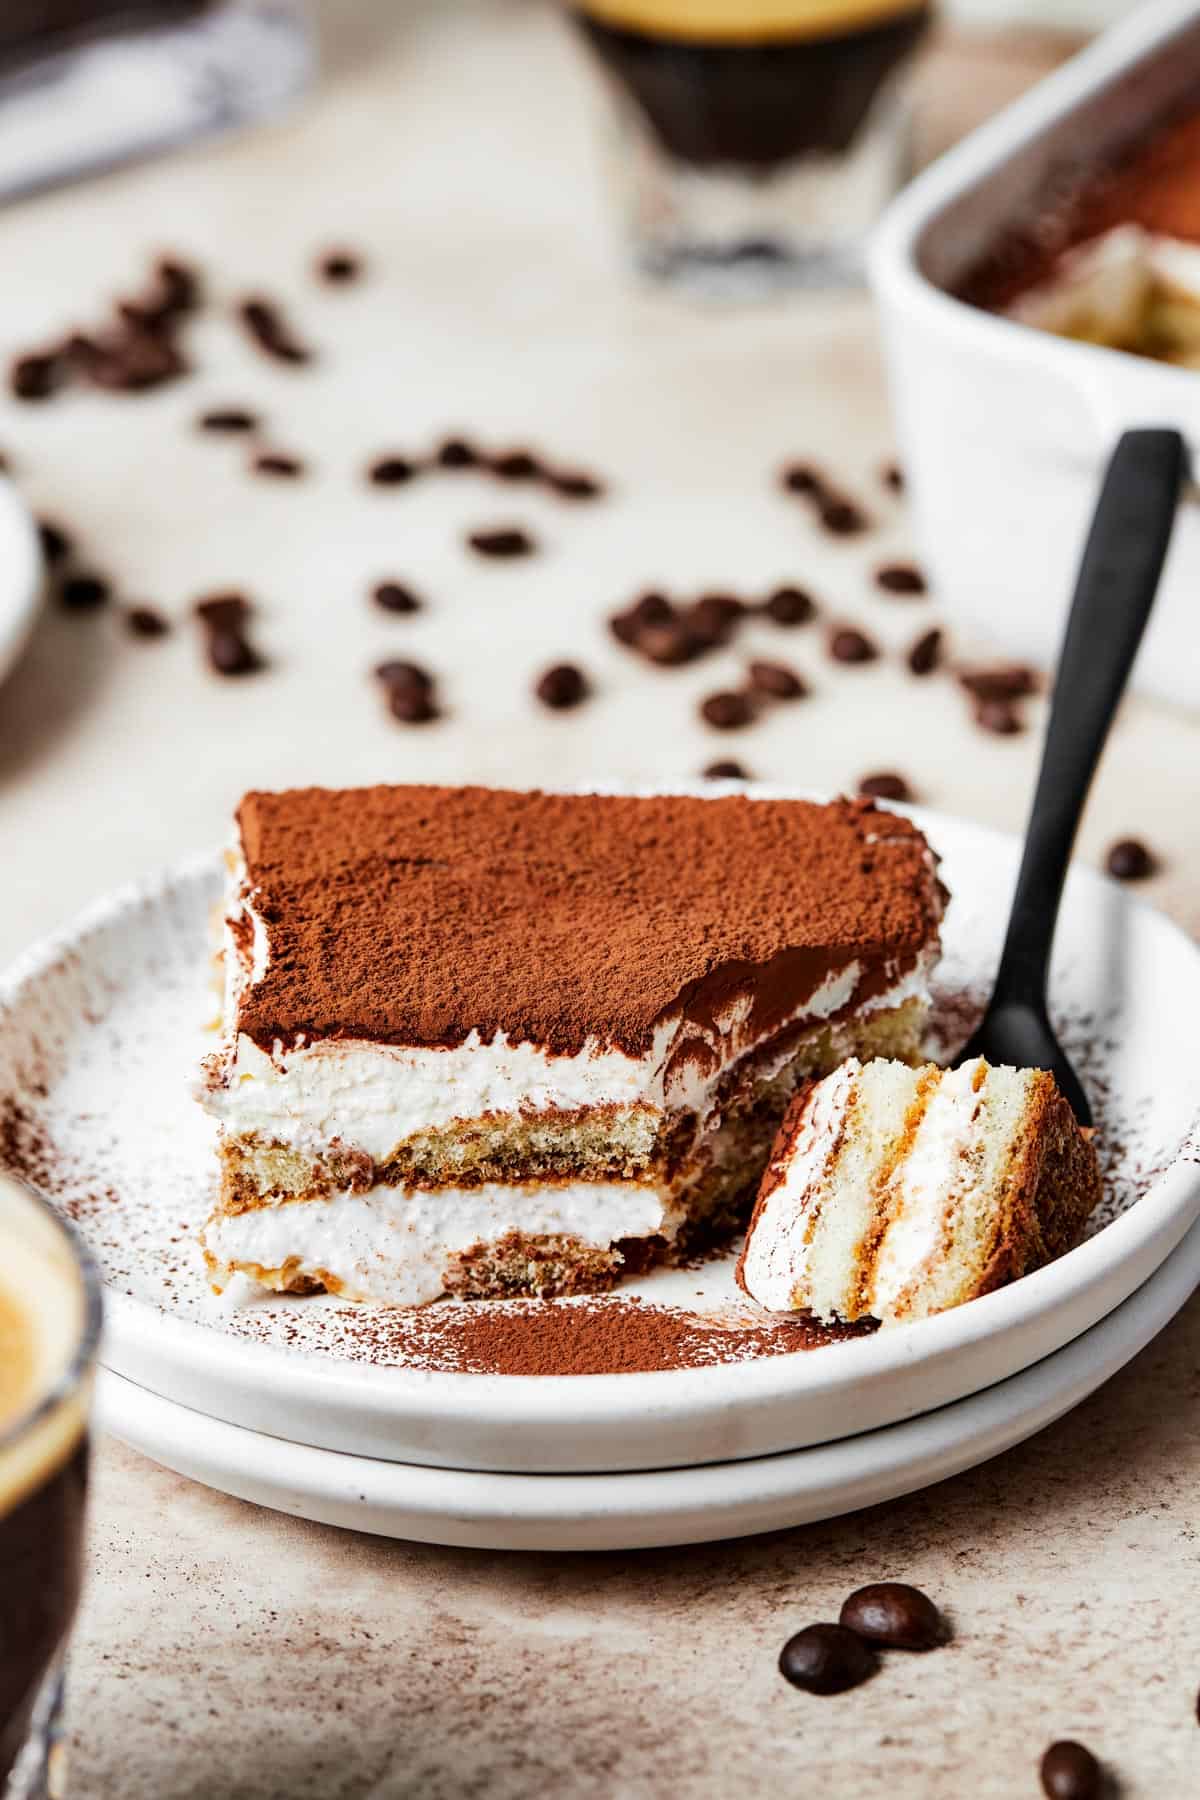 A serving of layered, chilled dessert with a forkful lying nearby on the plate.